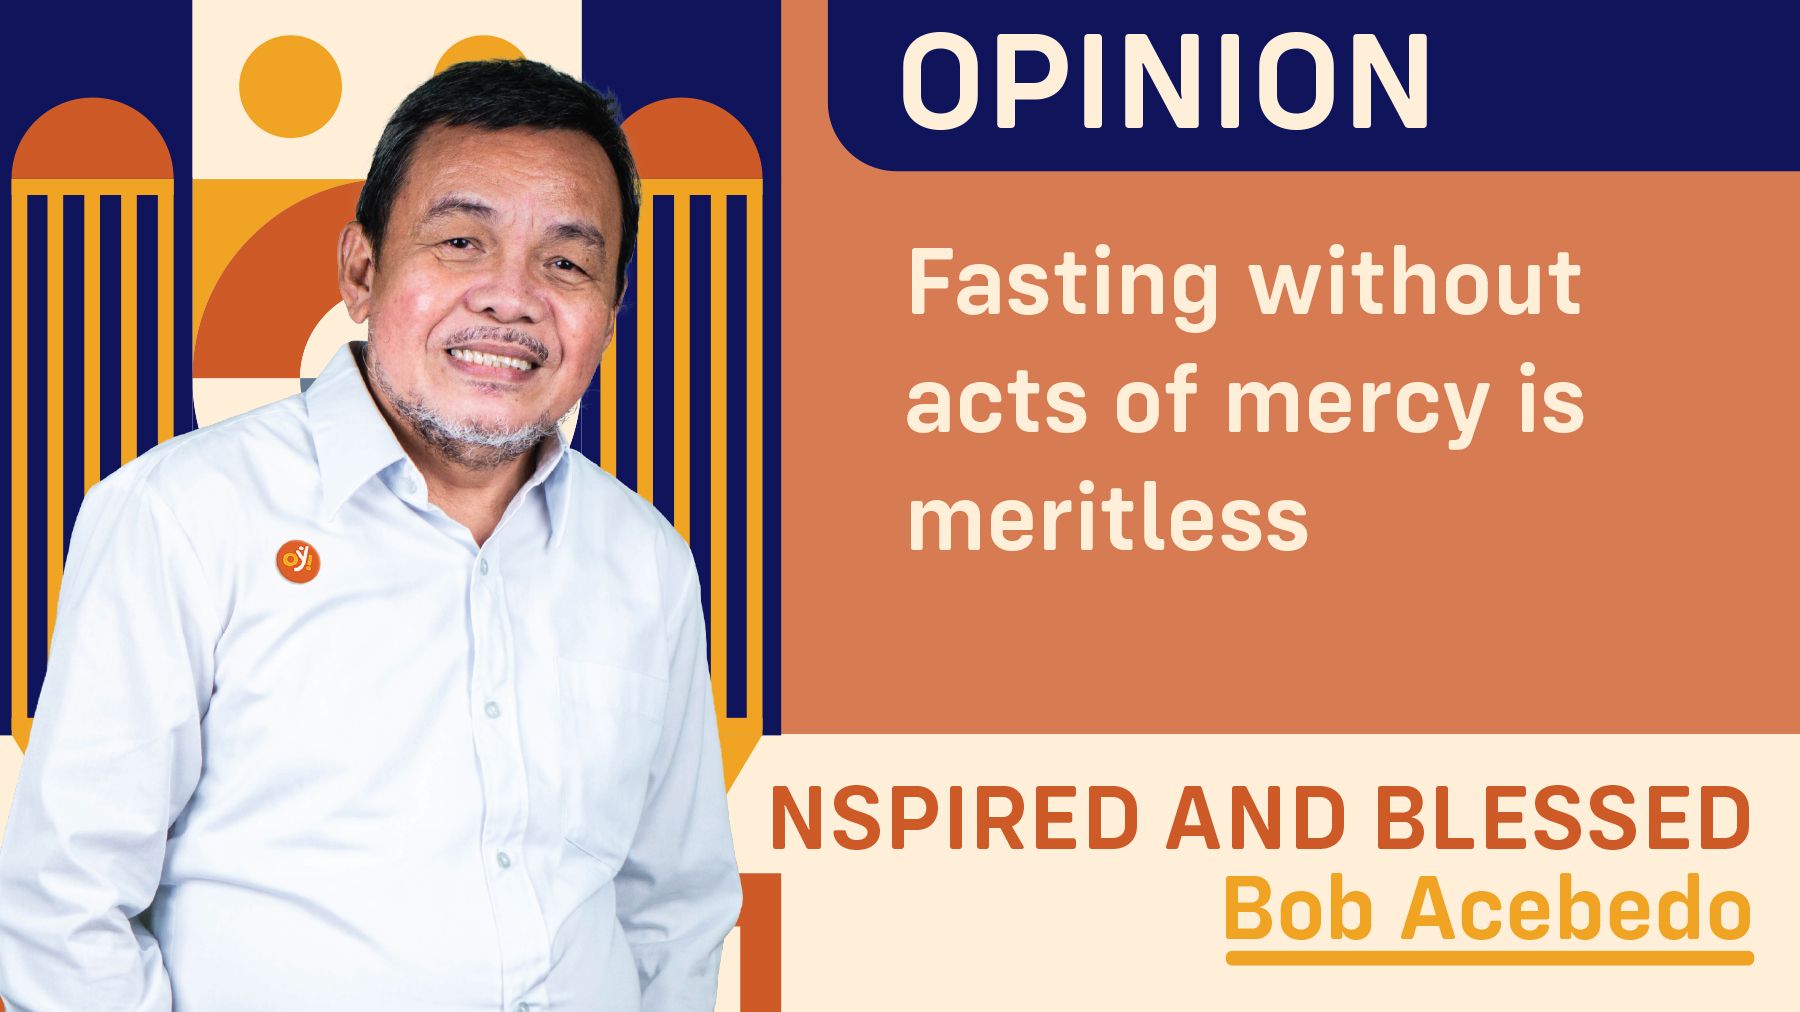 Fasting without acts of mercy is meritless